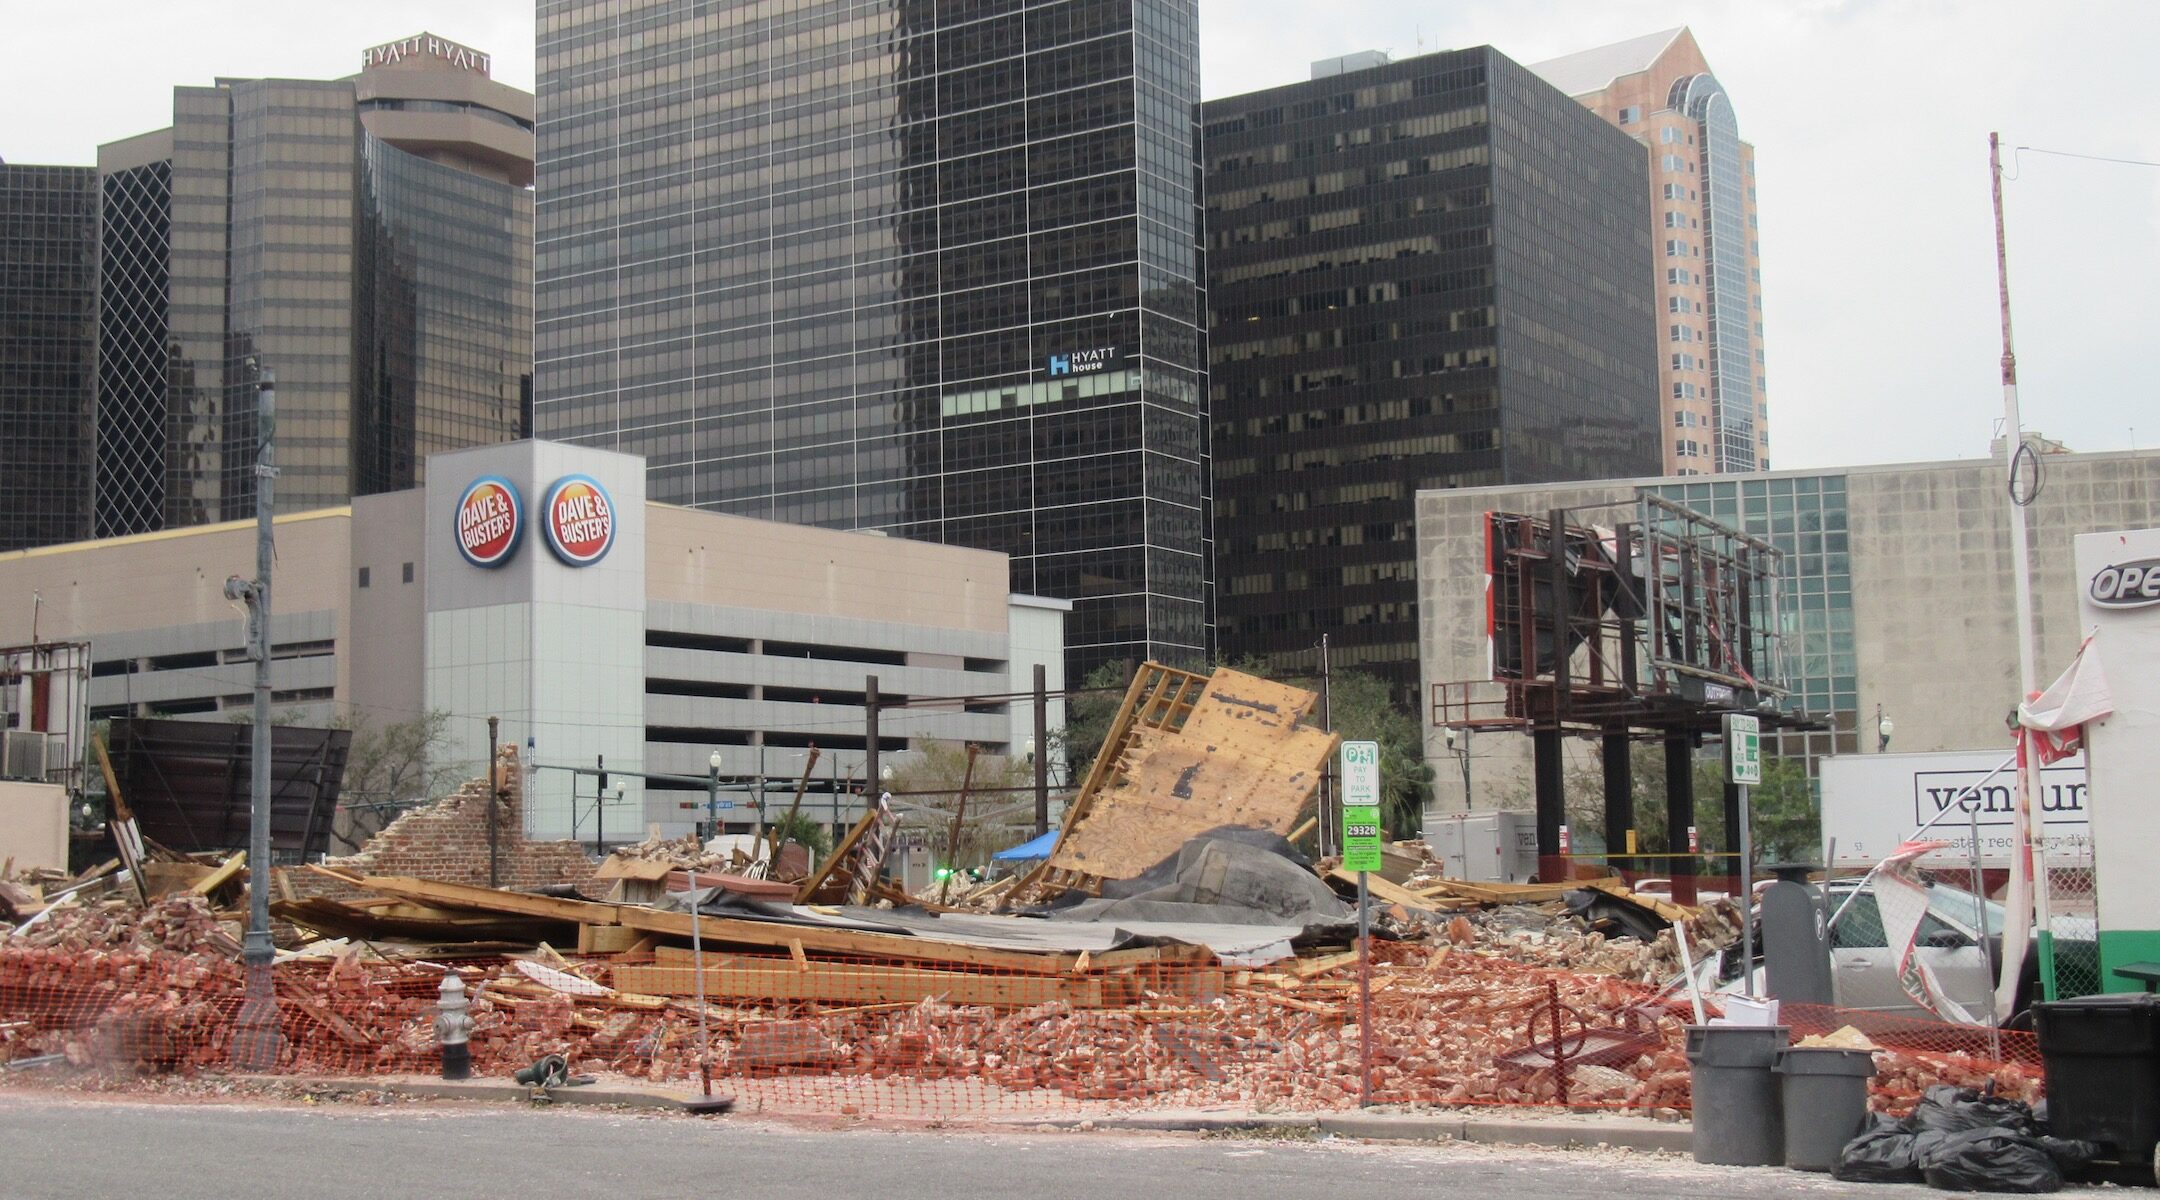 The rubble after the Karnofsky building was leveled by floods in Hurricane Ida.